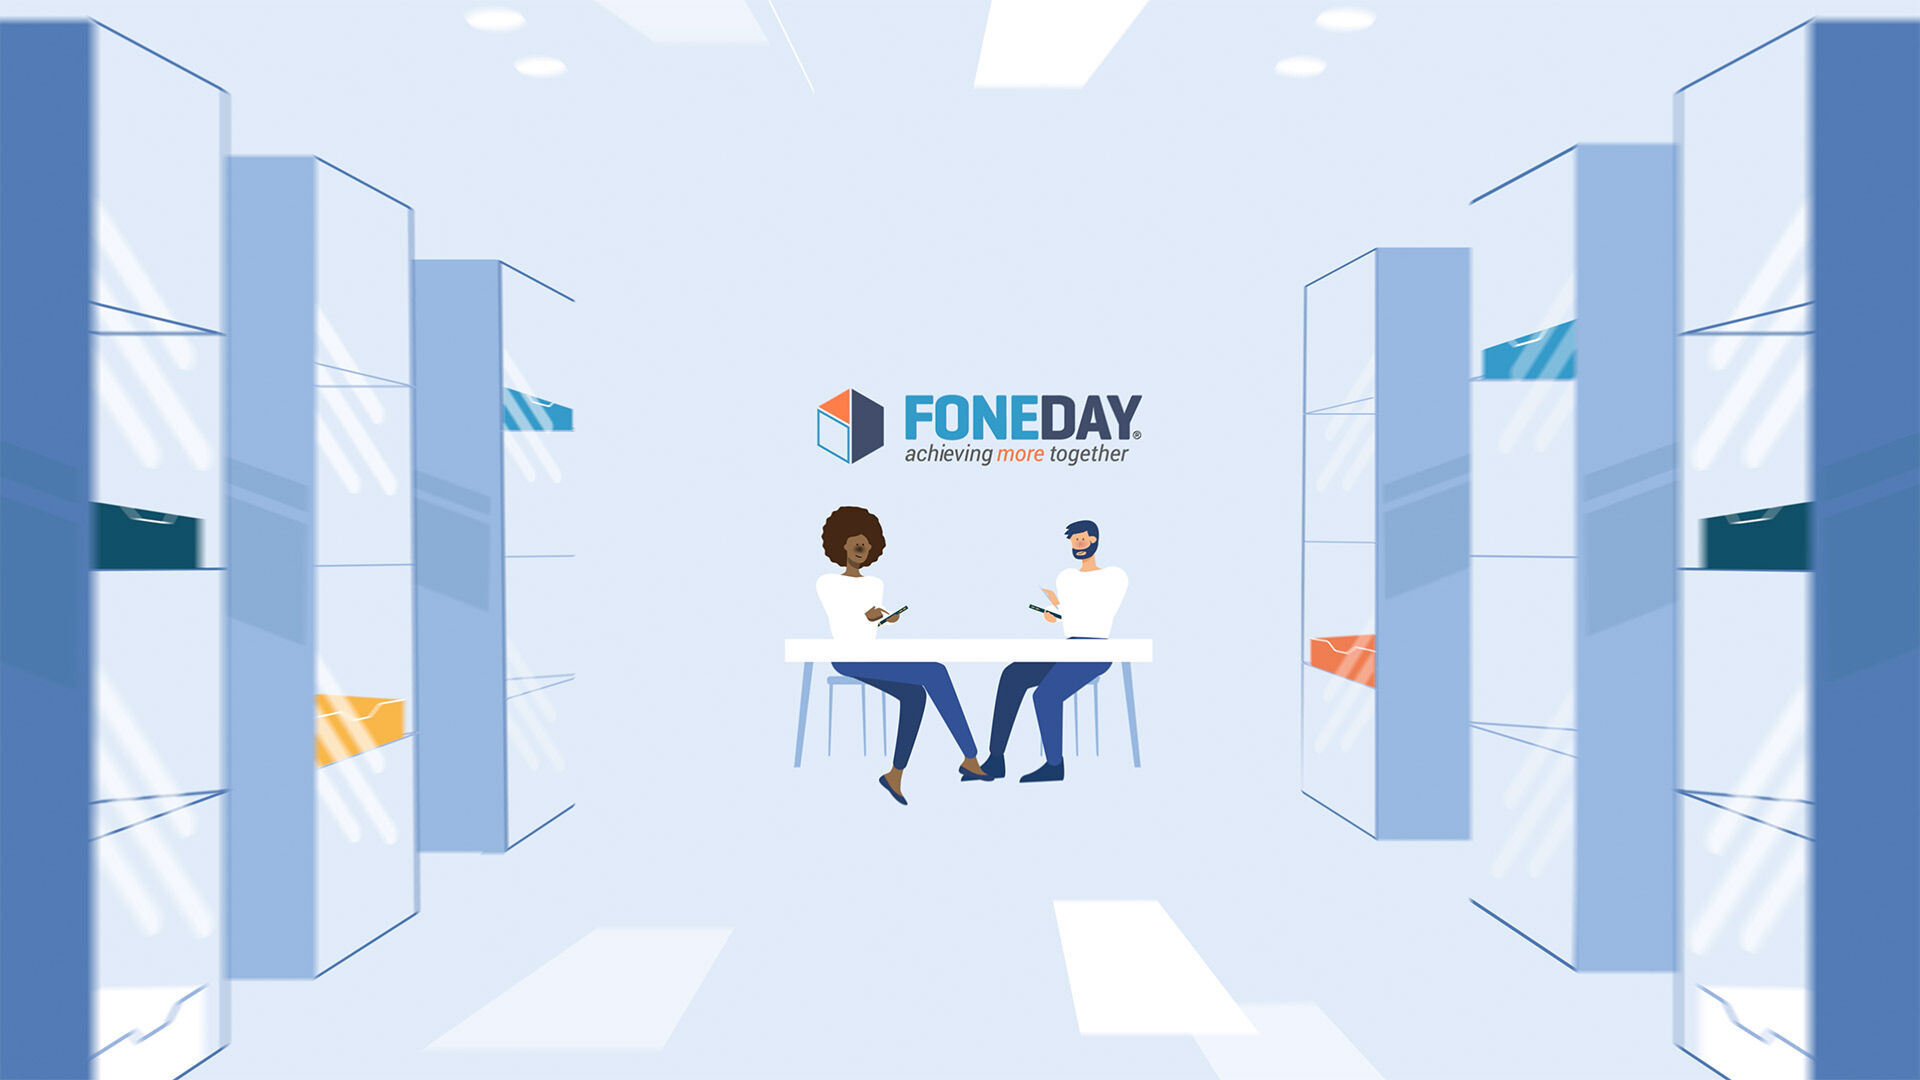 Foneday - Achieving more together